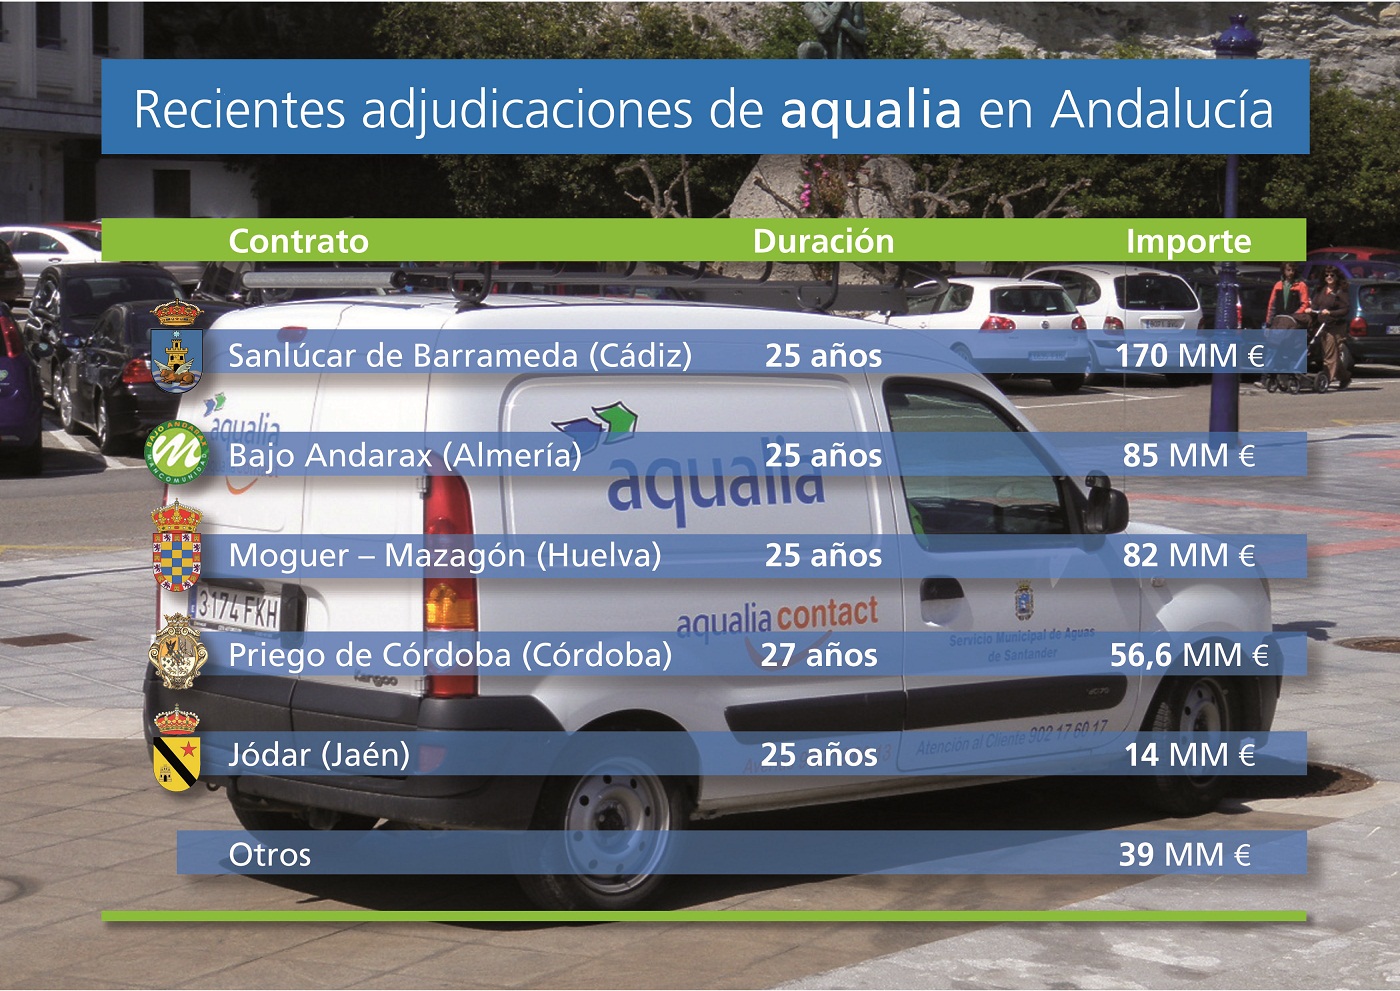 Aqualia consolidates positionas leadingwater managementcompany with contracts totalling 477 million euro in Andalusia in 2010